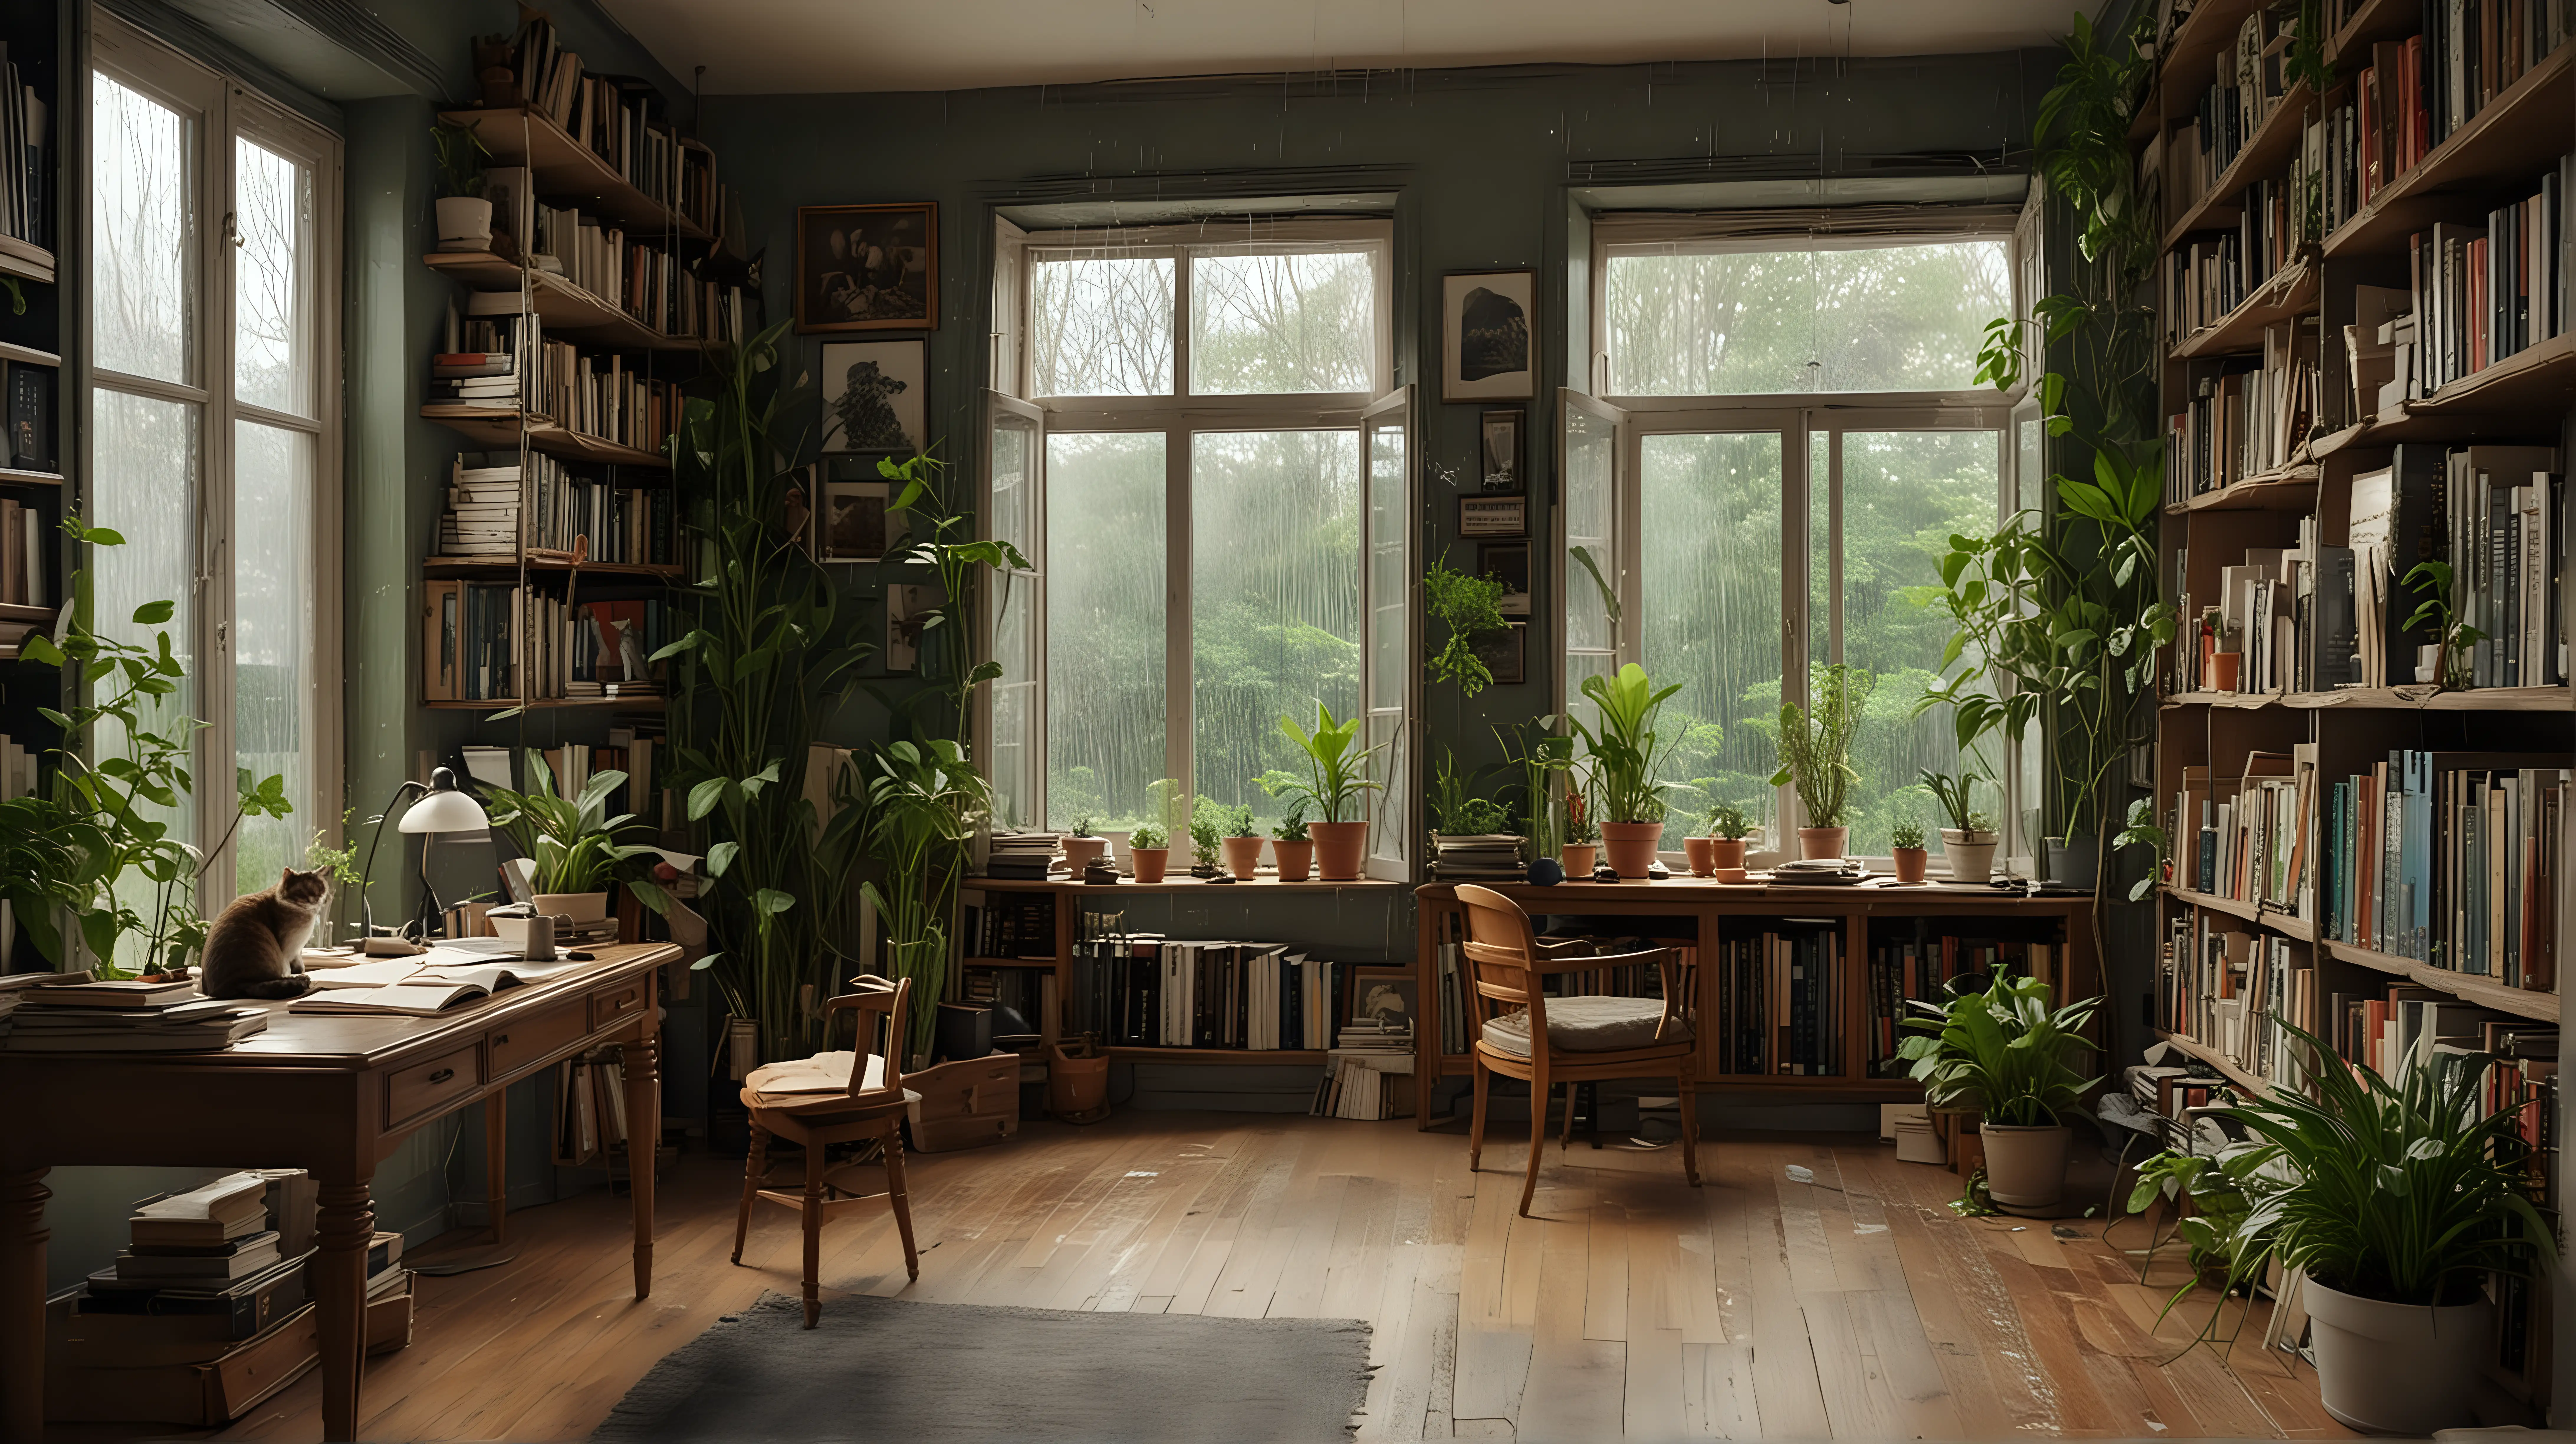 Cozy Home Office with Wall of Books Rainy Day Ambiance and a Curious Cat